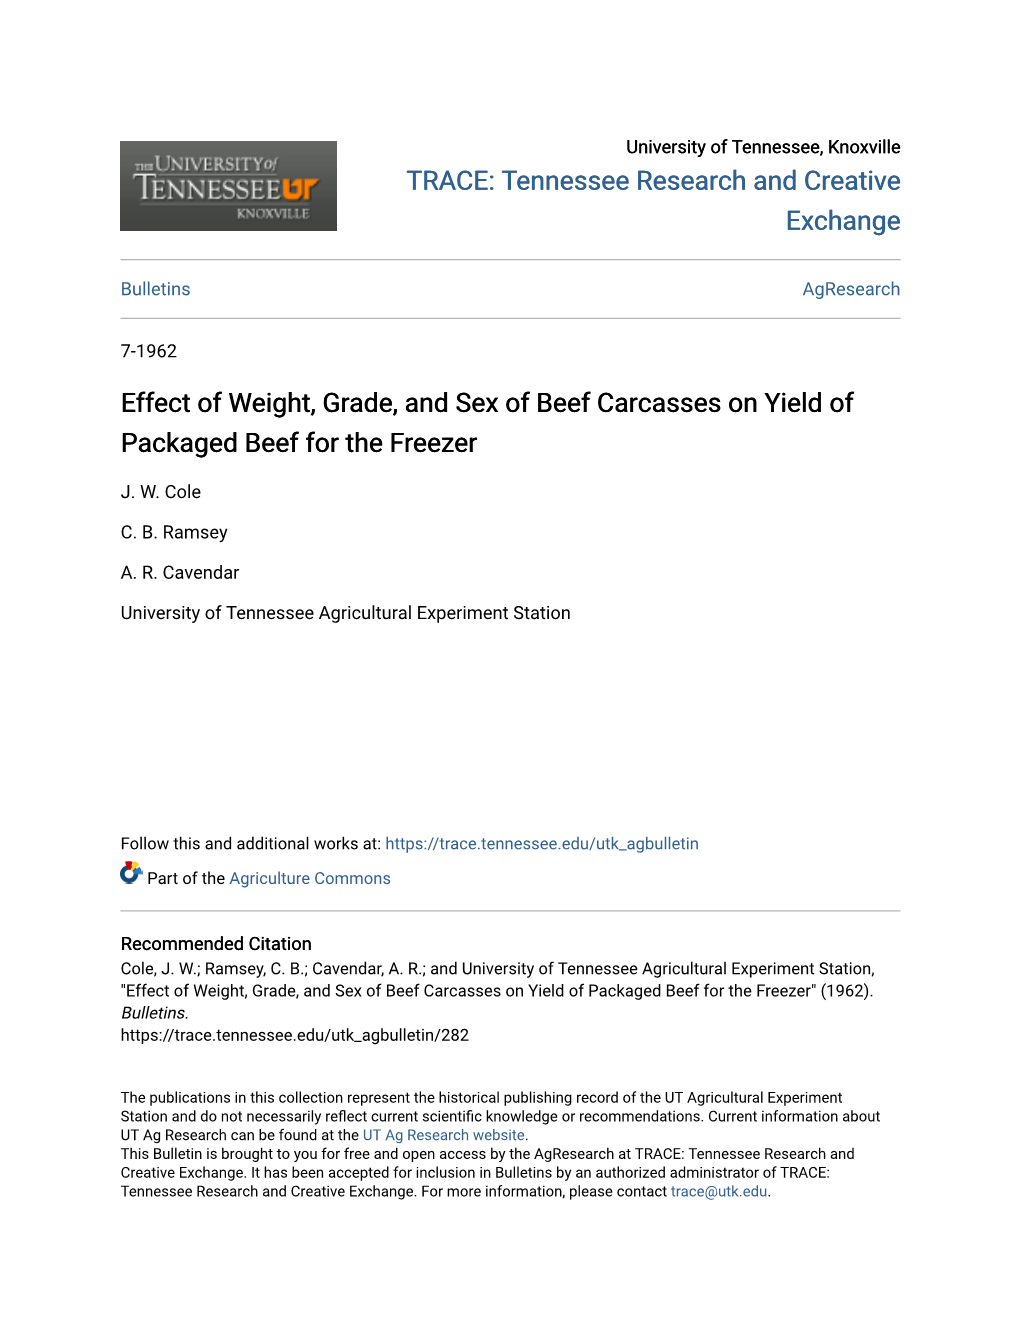 Effect of Weight, Grade, and Sex of Beef Carcasses on Yield of Packaged Beef for the Freezer